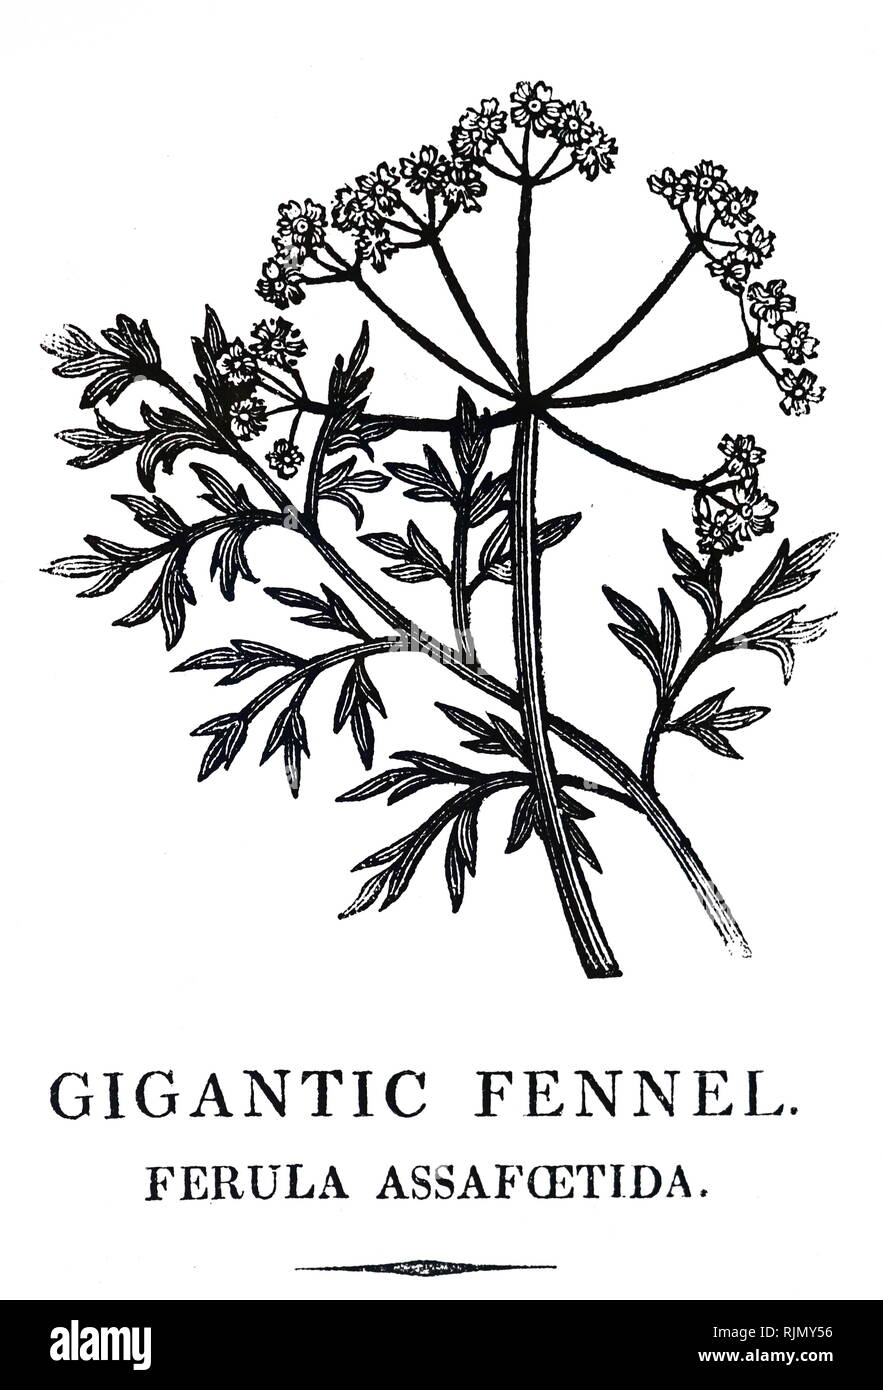 An engraving depicting Giant Fennel.  From Robert John Thornton A New Family Herbal, London, 1810. Woodcut by Thomas Bewick Stock Photo